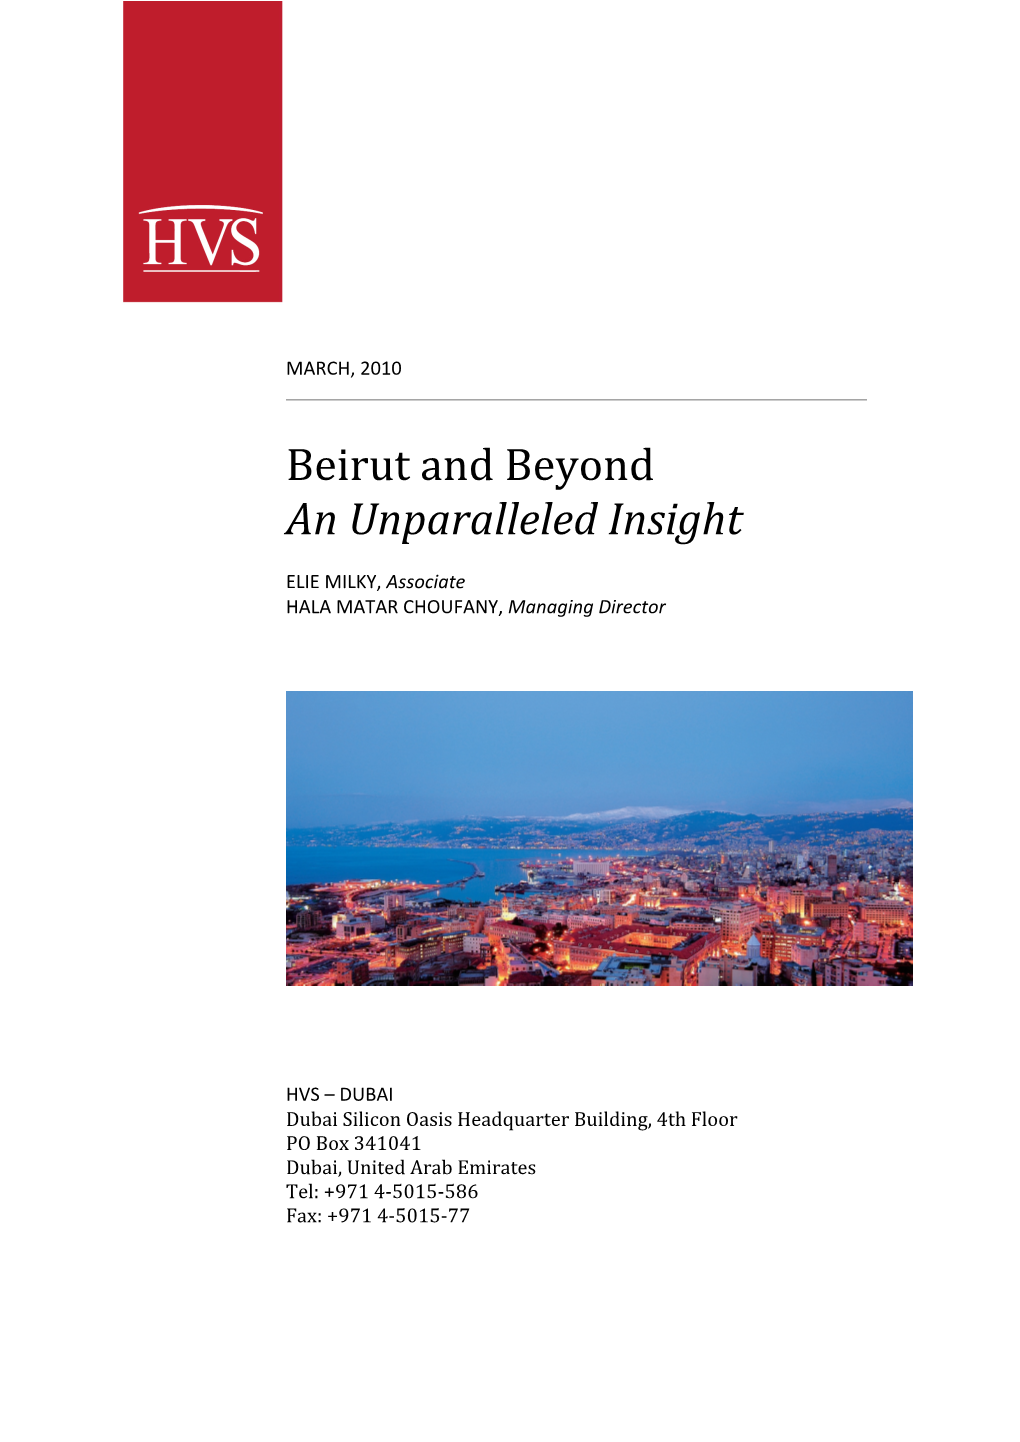 Beirut and Beyond an Unparalleled Insight